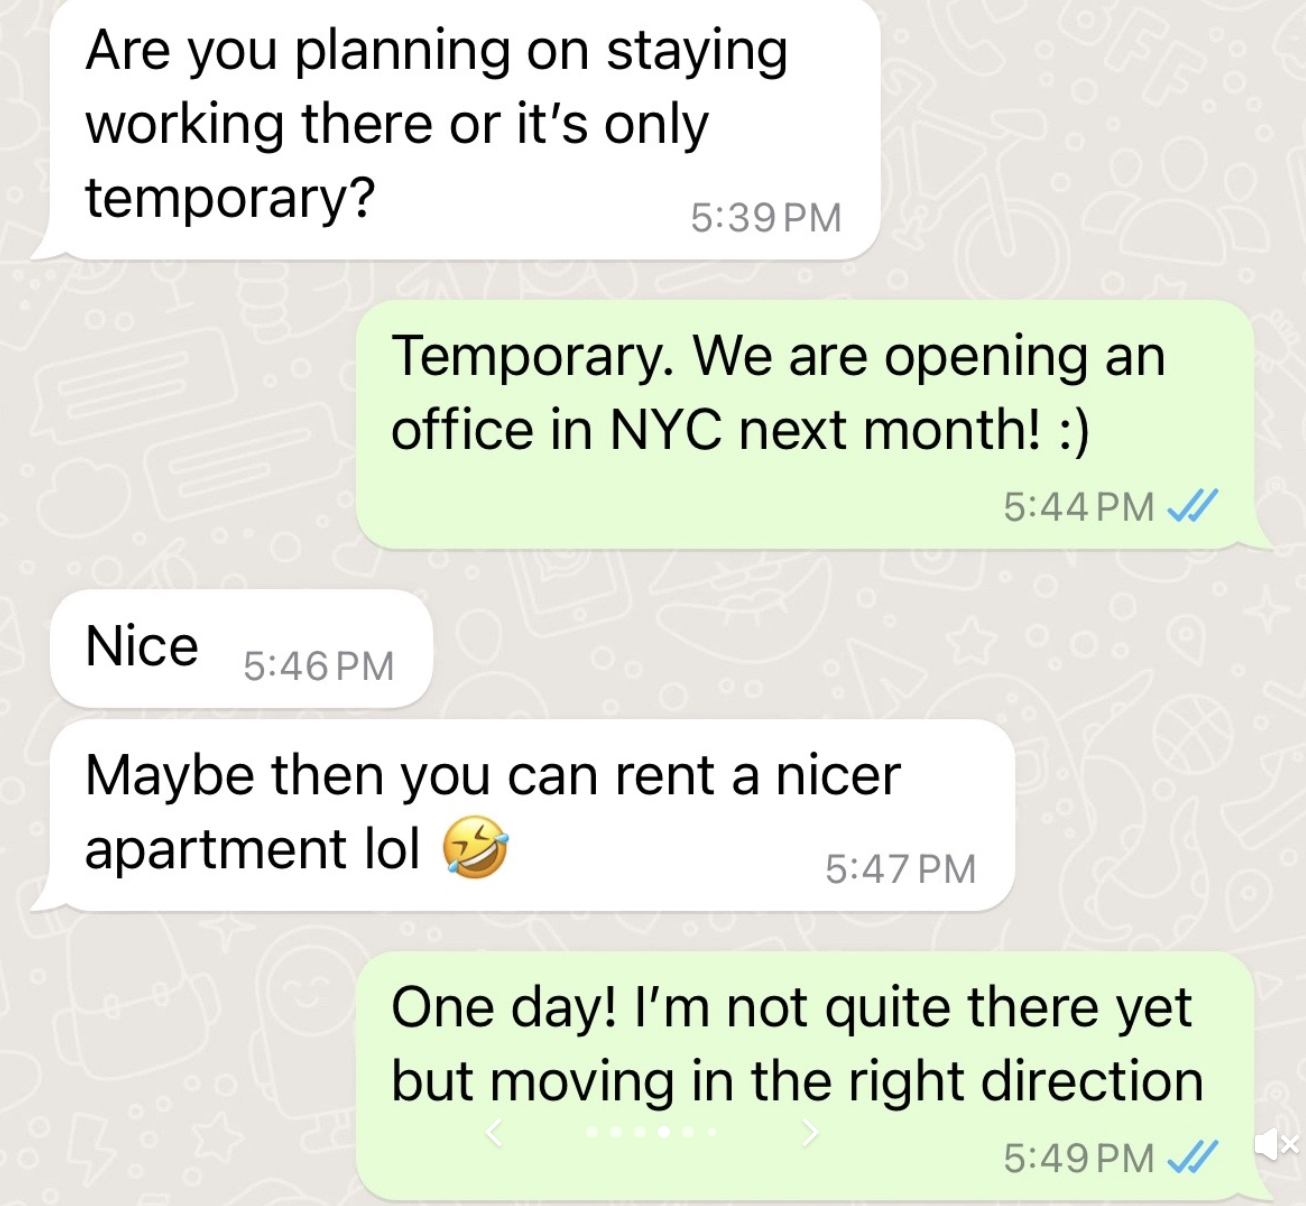 angle - Are you planning on staying working there or it's only temporary? Nice Temporary. We are opening an office in Nyc next month! Maybe then you can rent a nicer apartment lol One day! I'm not quite there yet but moving in the right direction